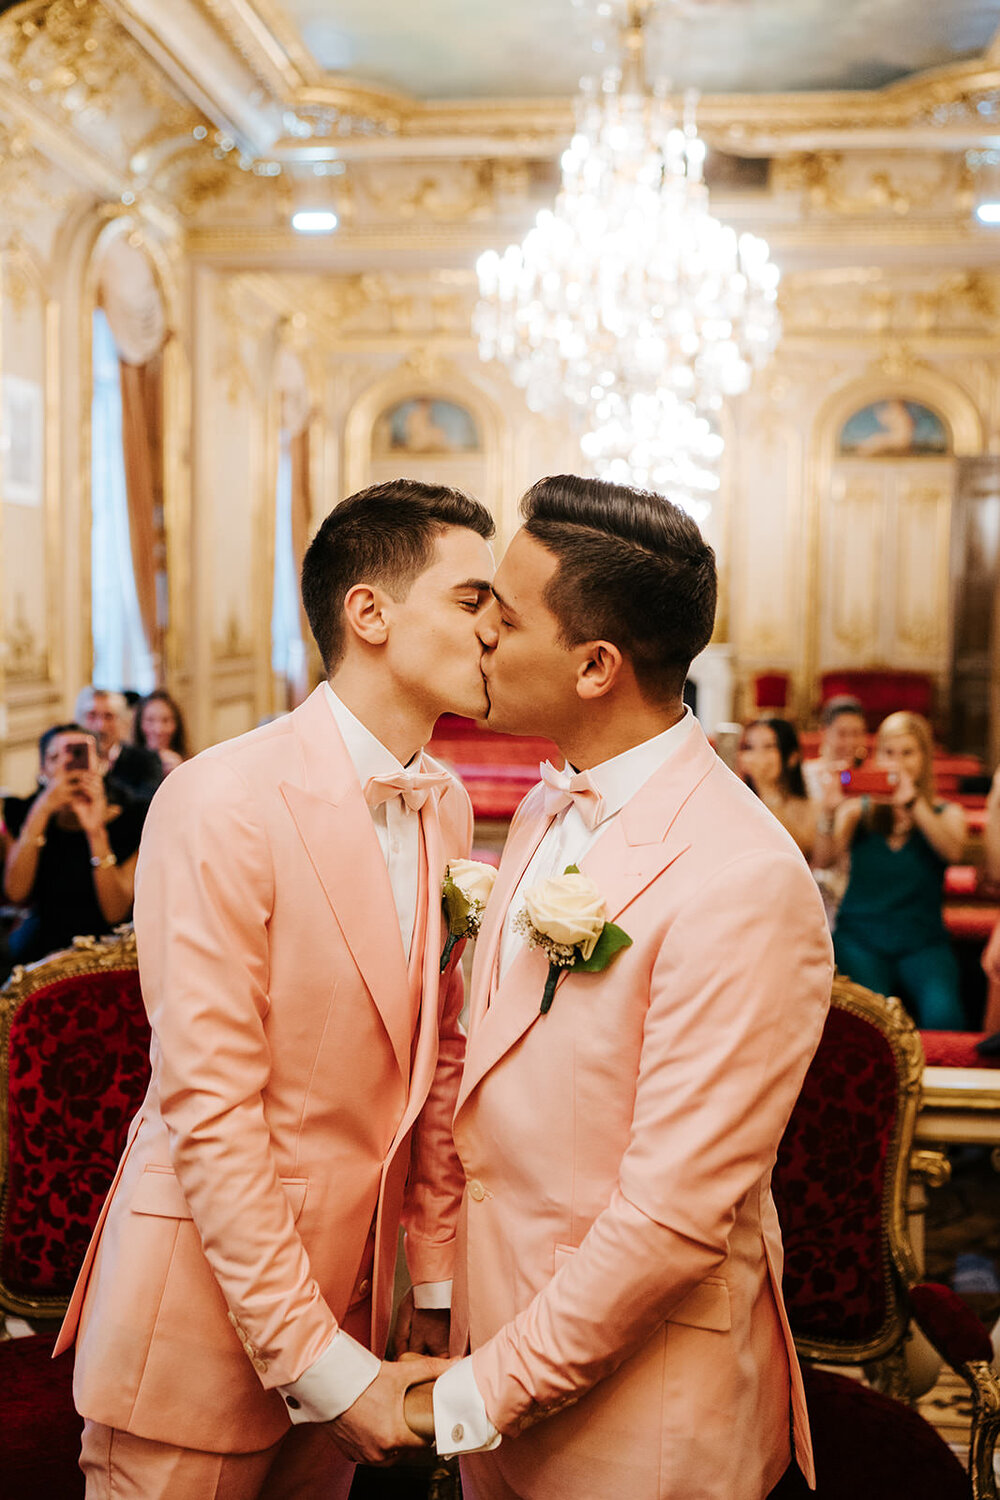 Two grooms in pink tuxedos kiss and hold hands during wedding ceremony in Paris